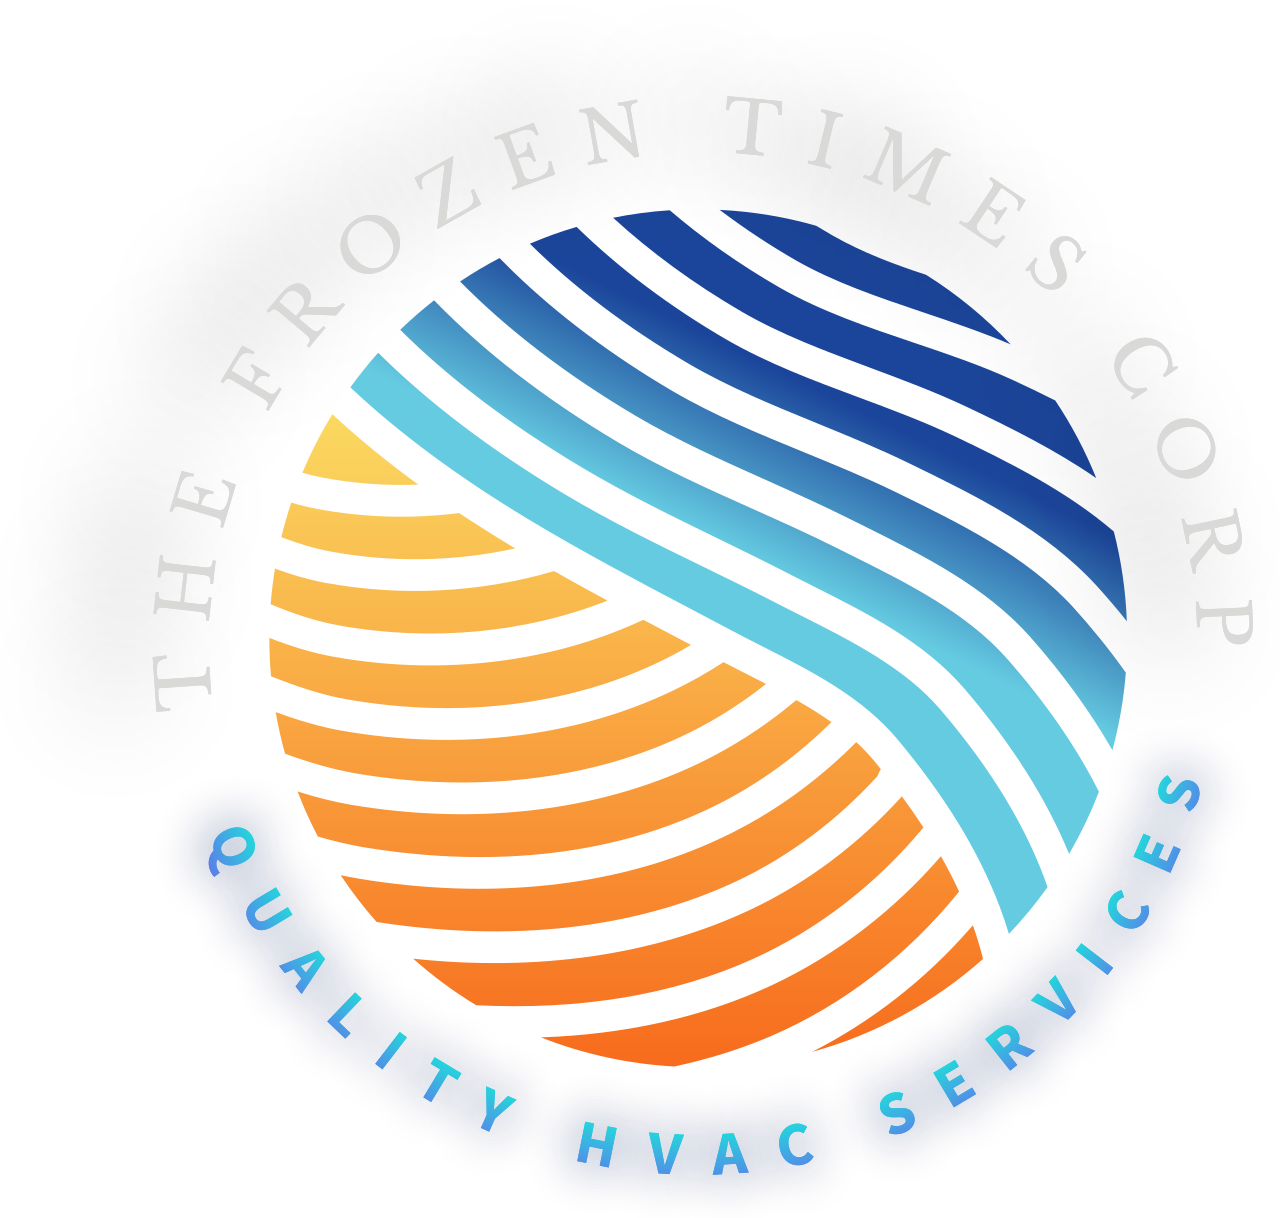 The frozen Times Corp 's logo